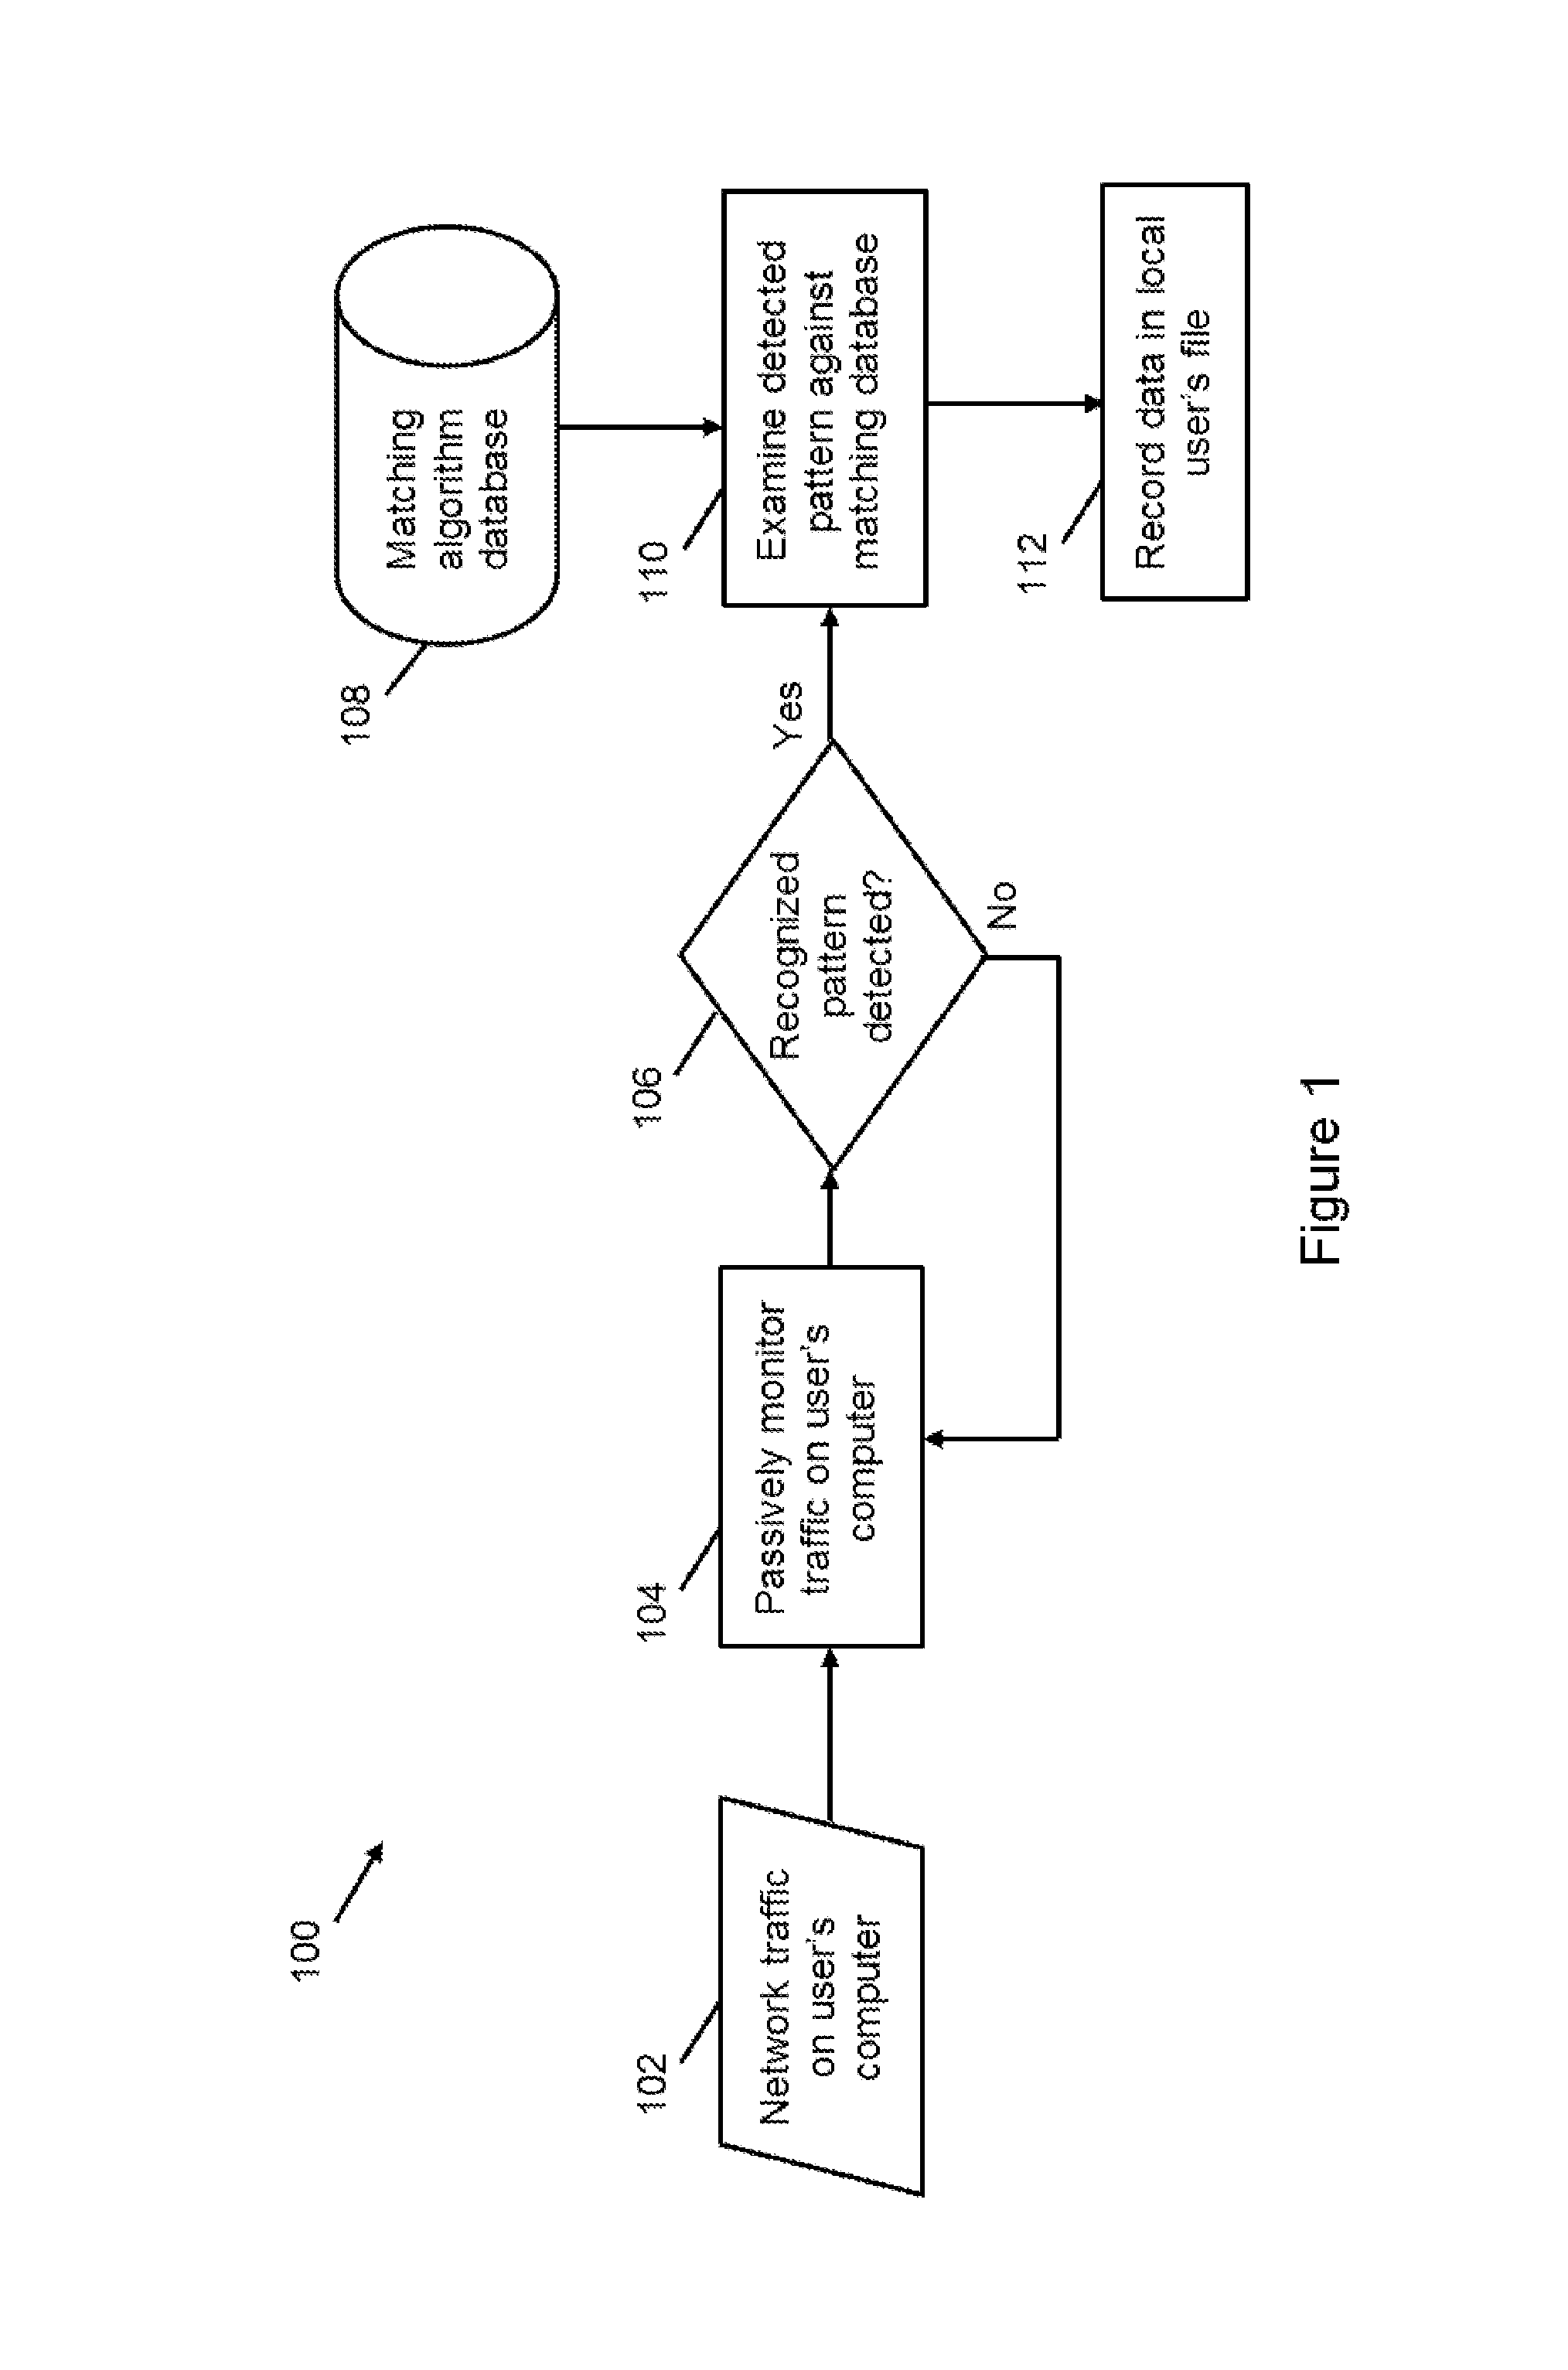 Relative value unit monitoring system and method